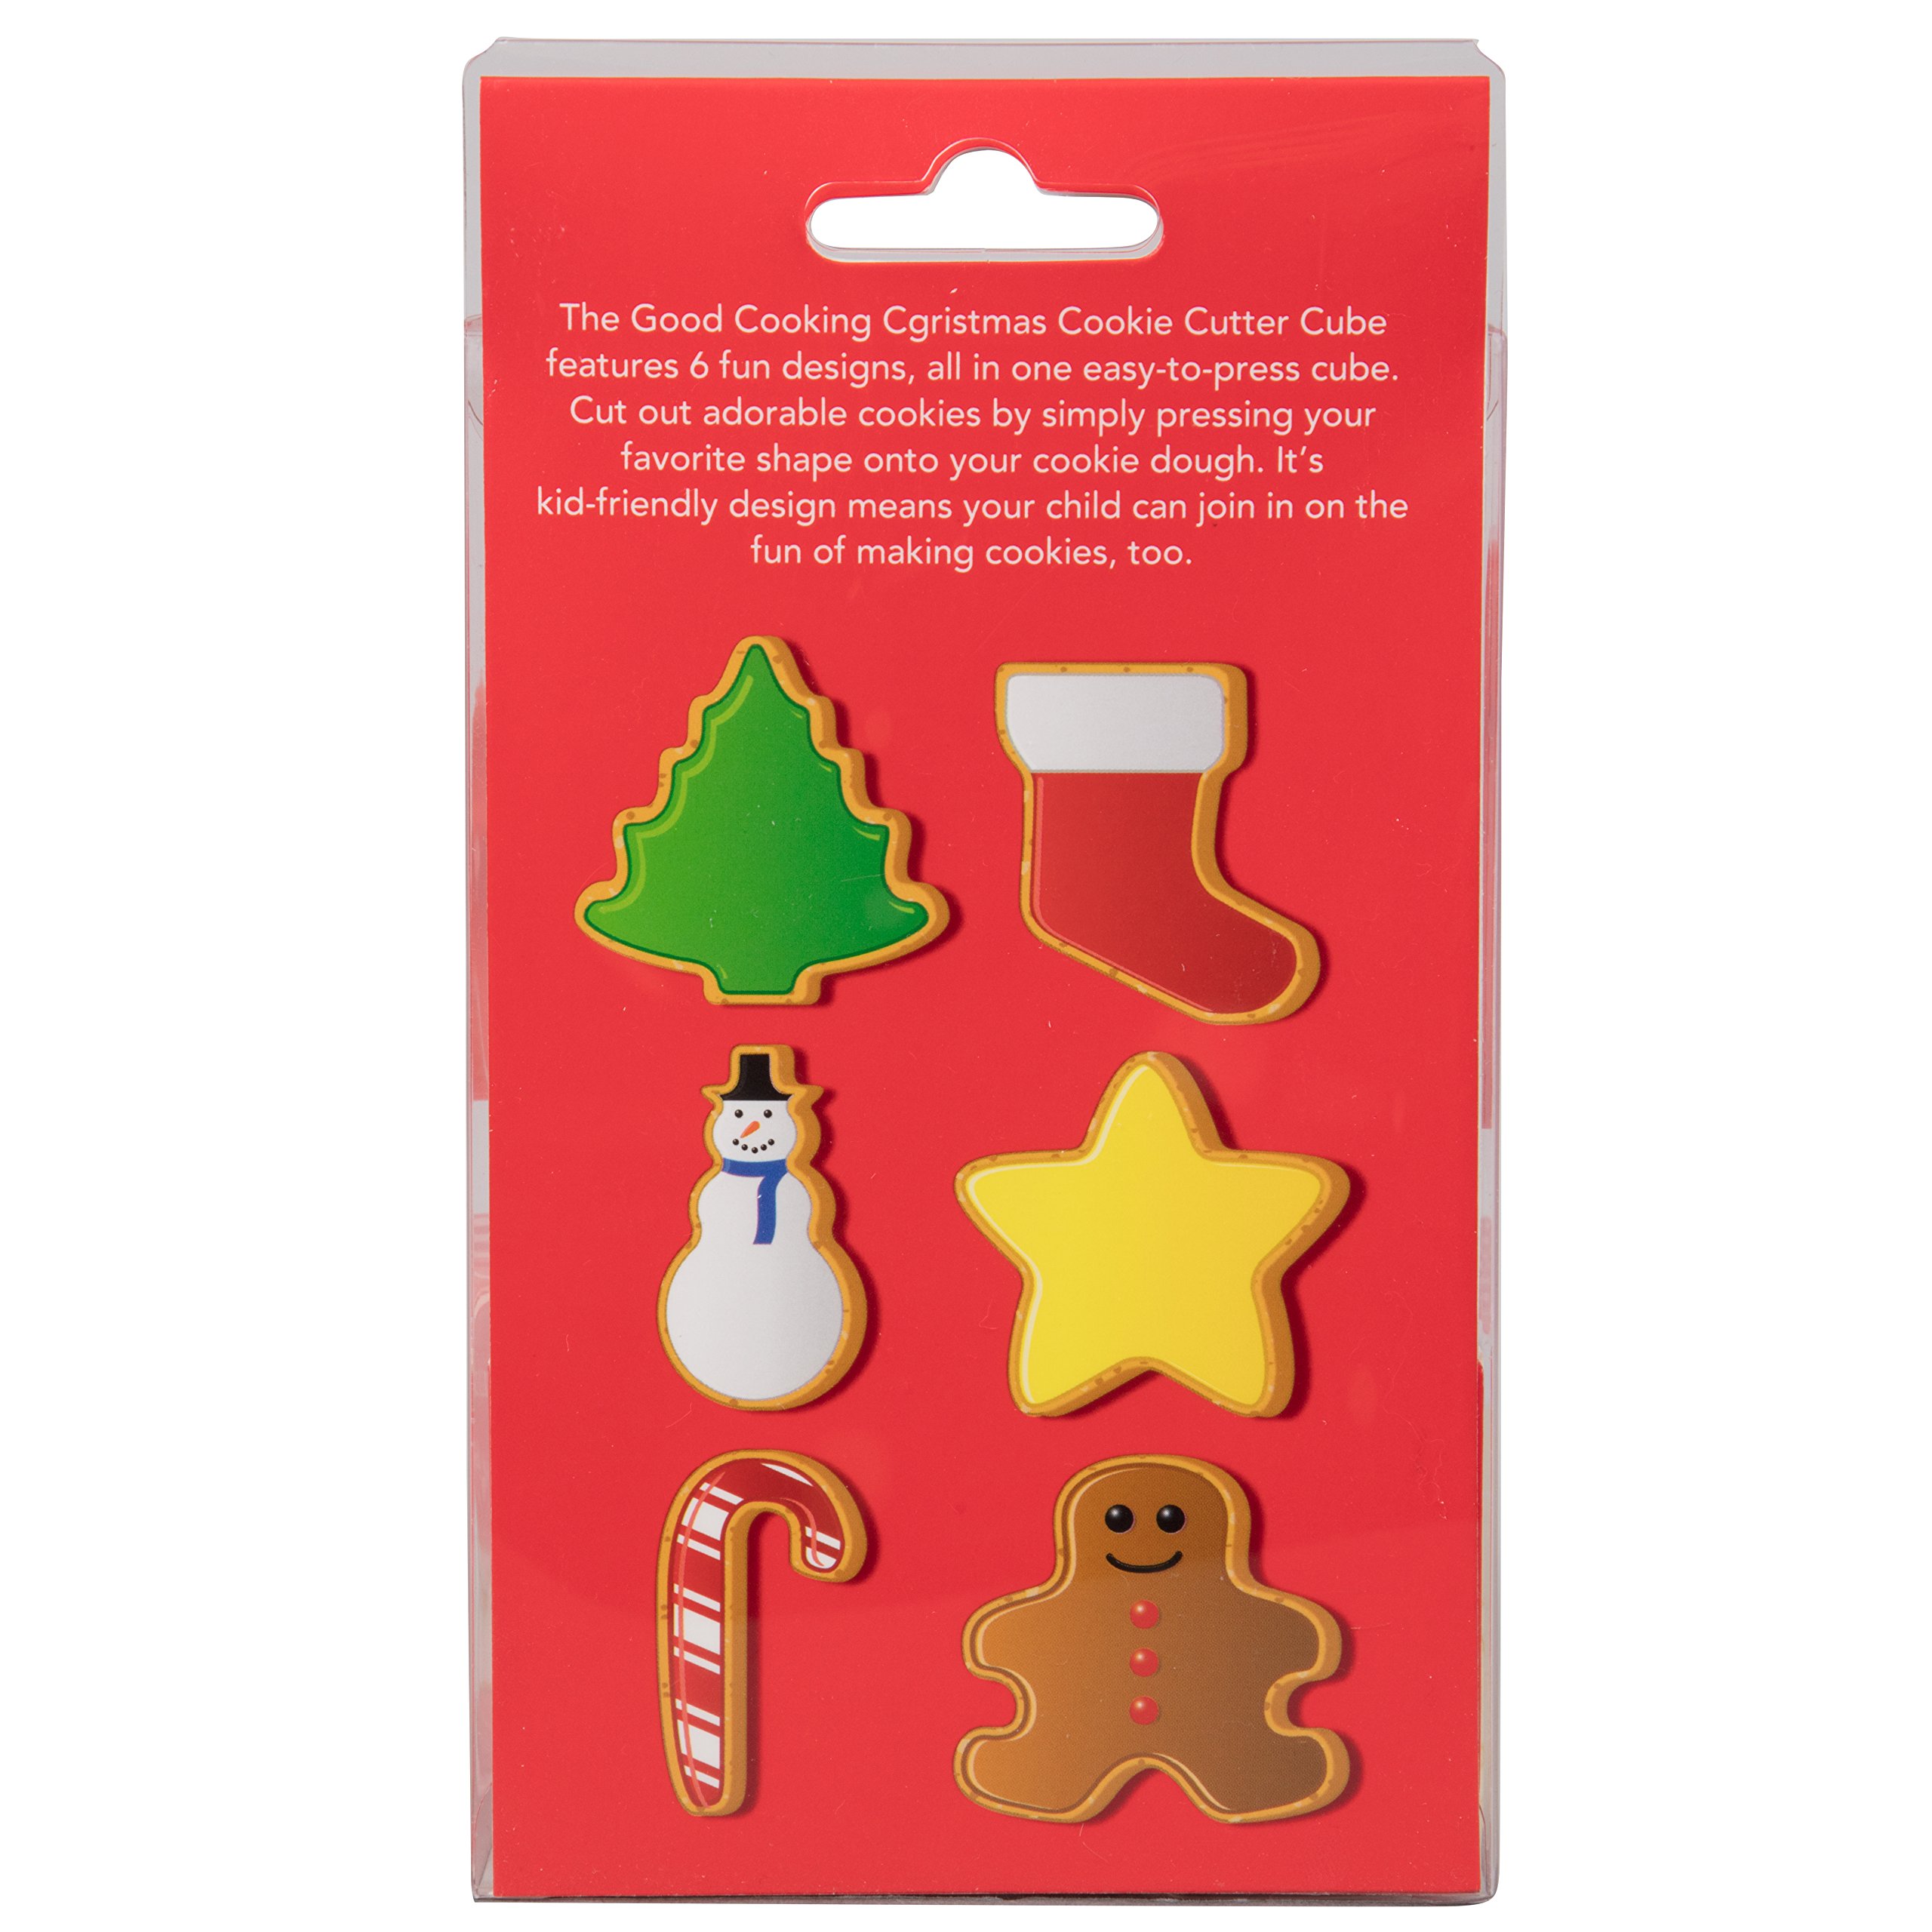 Christmas Cookie Cutter Cube-Holiday Party Cookie Easy Press Set w 6 Unique Winter Shapes- All in One 6-Sided Clutter Free Festive; Stocking Candy Cane Star Tree Gingerbread Man Dishwasher Safe Baking